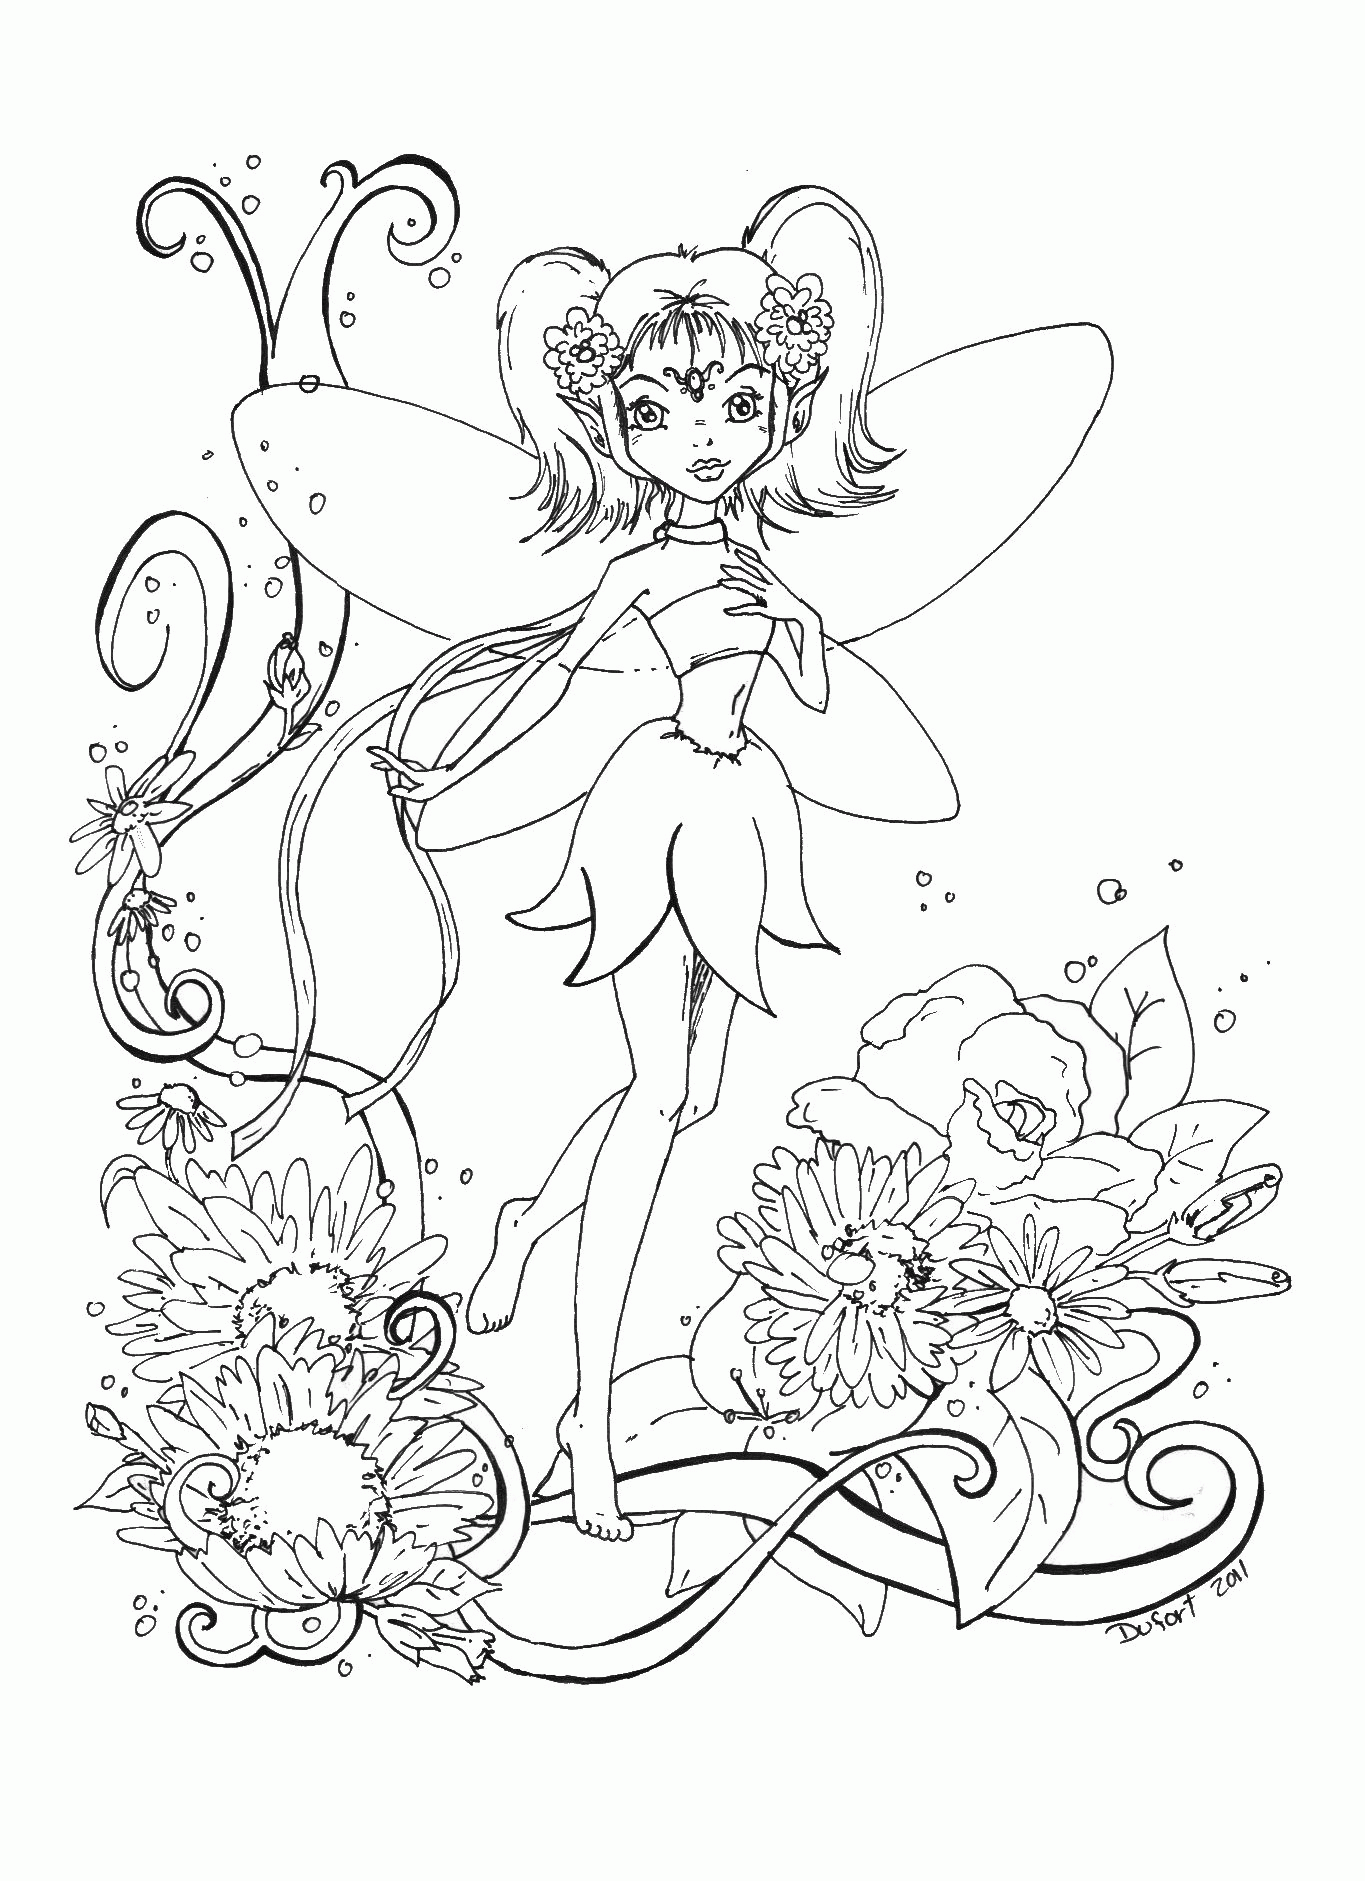 Cute Fairy Coloring Page